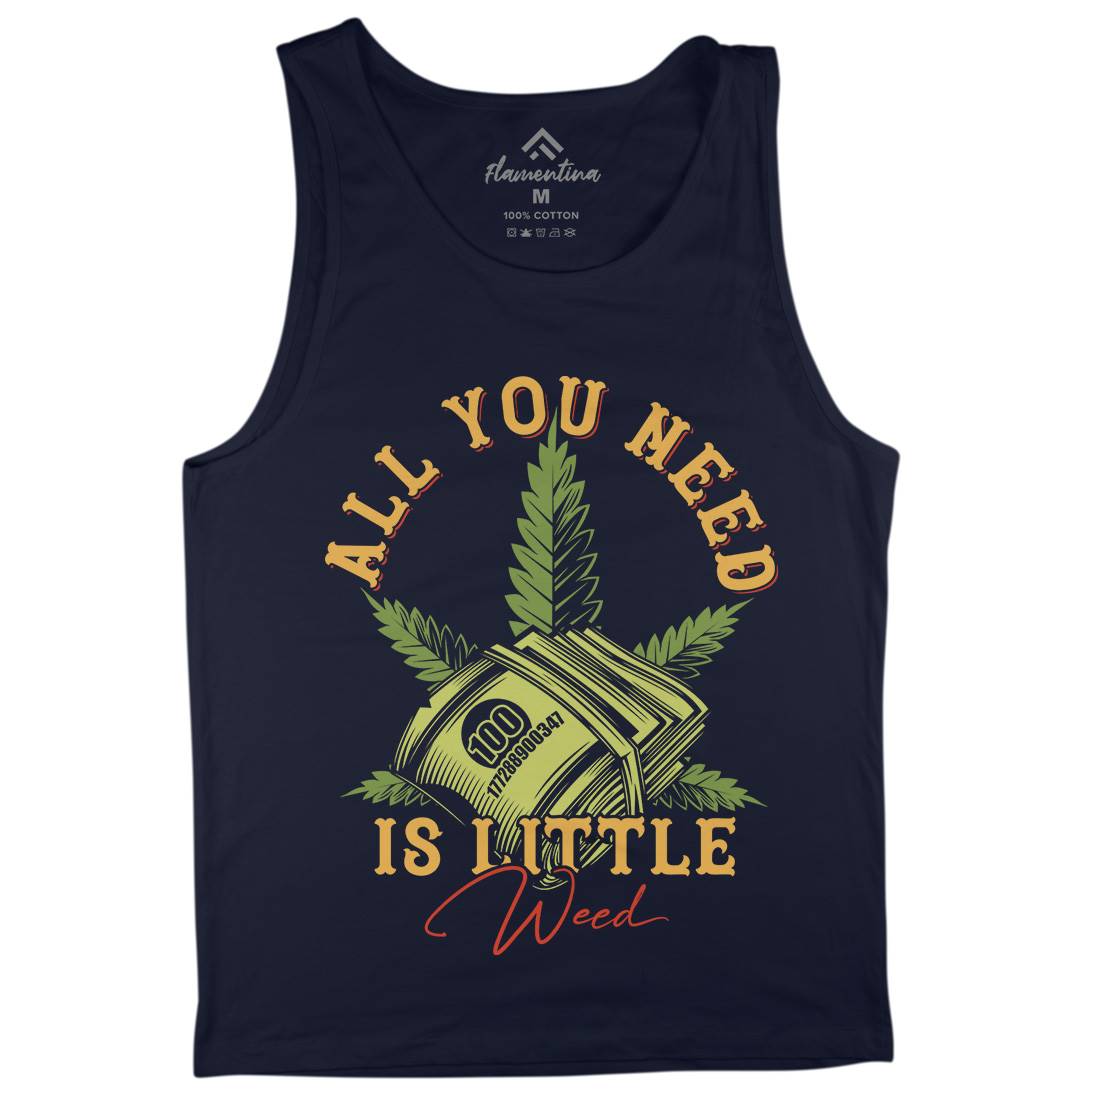 All You Need Mens Tank Top Vest Drugs B809